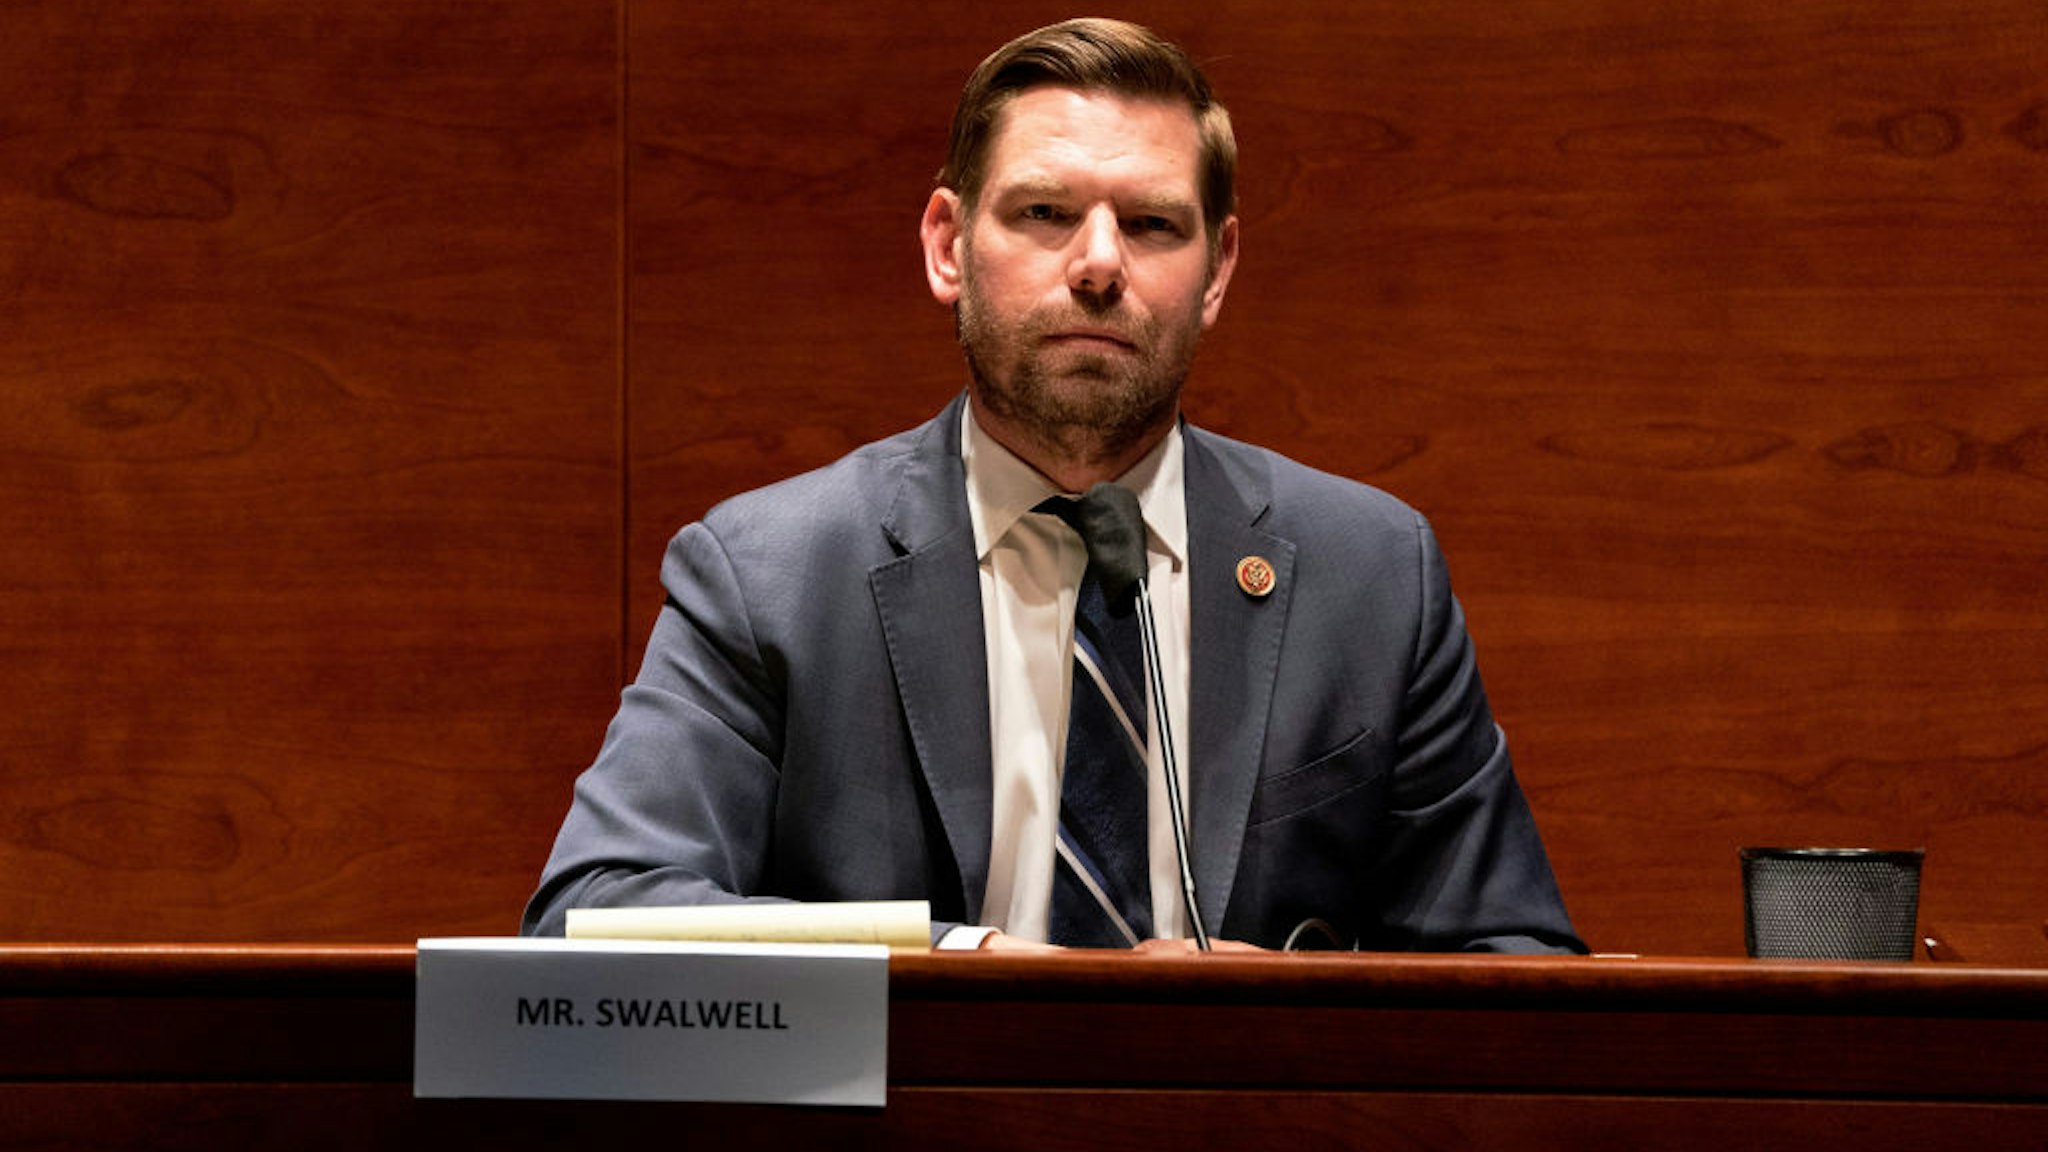 WASHINGTON, DC - JUNE 24: U.S. Rep. Eric Swalwell (D-CA) attends a hearing of the House Judiciary Committee on at the Capitol Building June 24, 2020 in Washington, DC. Democrats are highlighting what they say is the improper politicization of Attorney General Bill Barr’s Justice Department. (Photo by Anna Moneymaker-Pool/Getty Images)